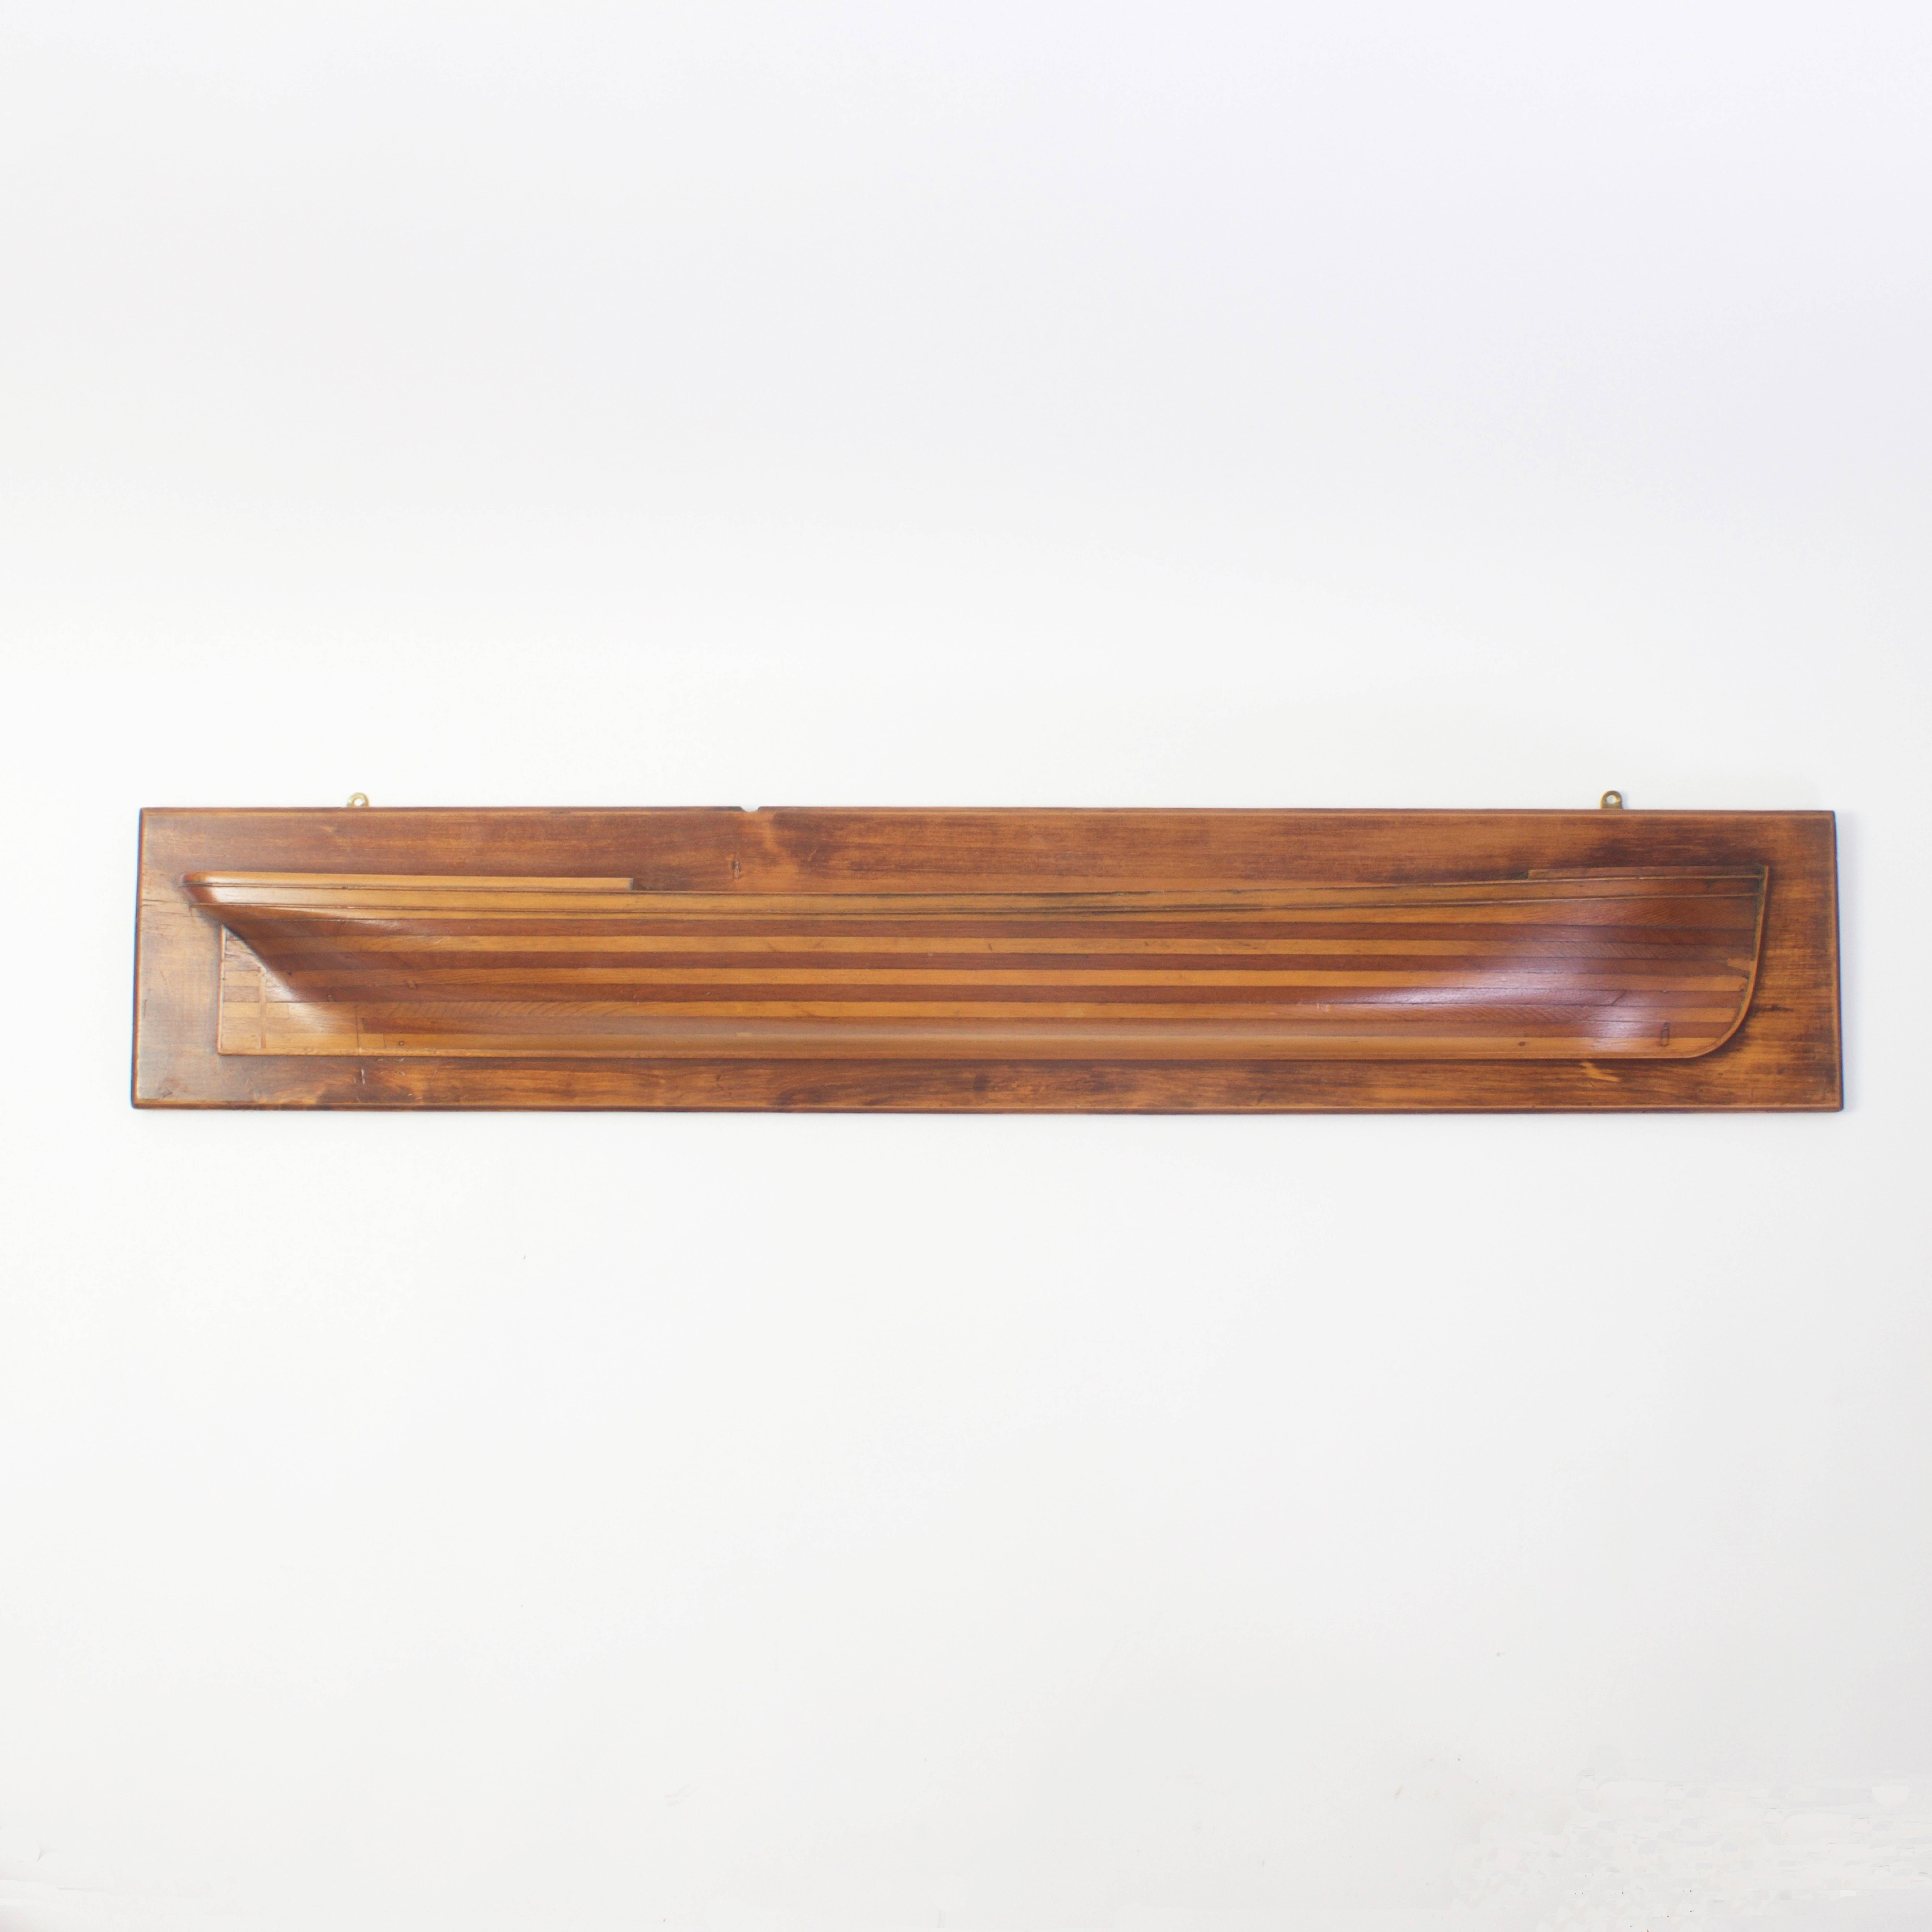 Vintage half hull boat model expertly crafted with alternating section of stained and unstained mahogany. This sleek ship model is handsomely presented on a pine plaque. 

.